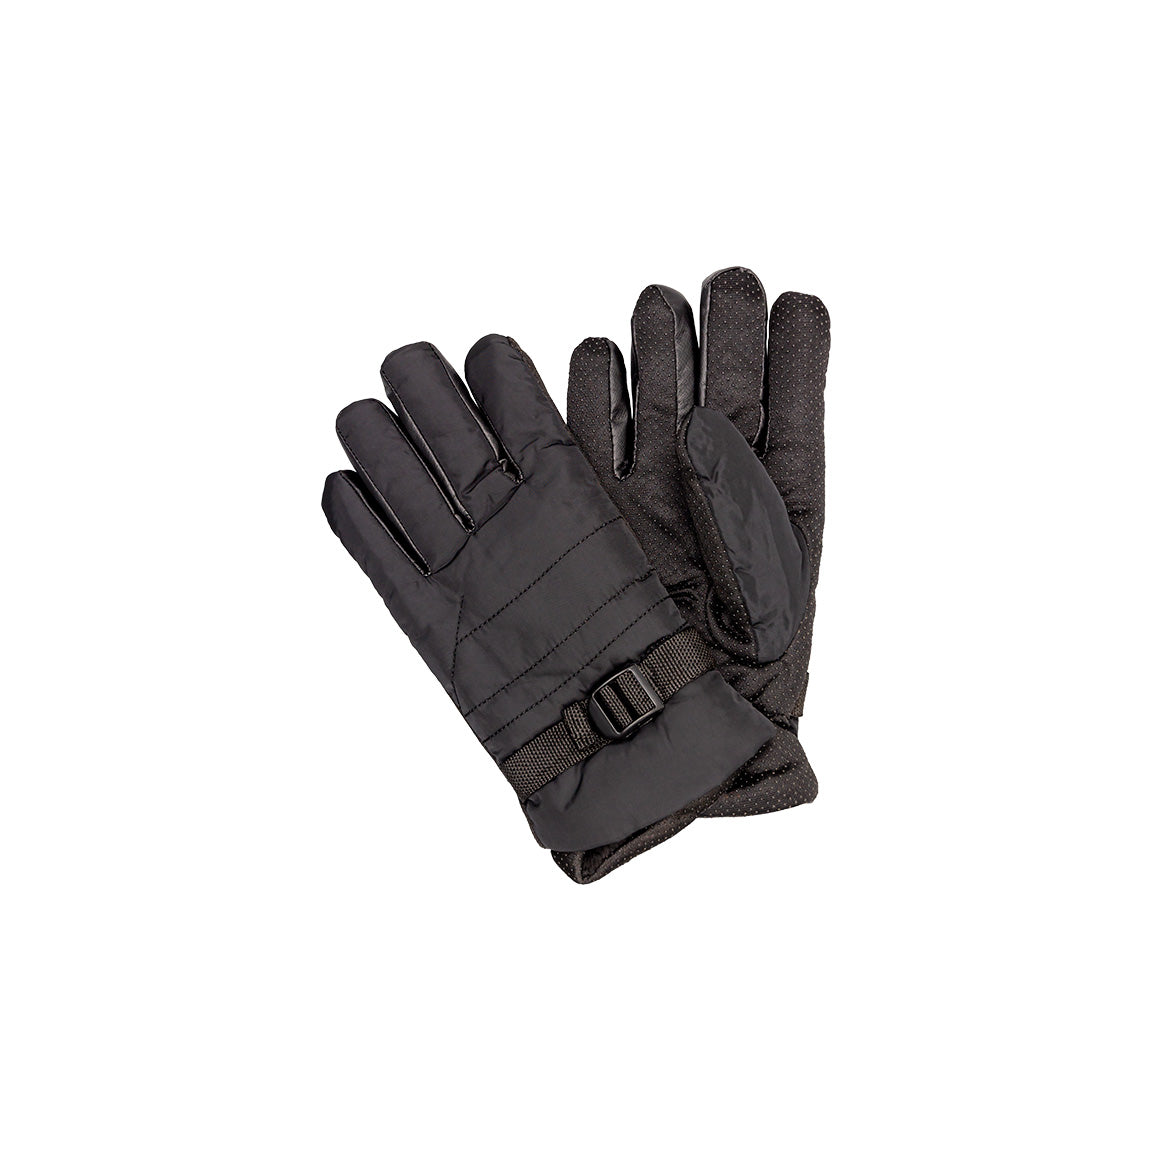 A pair of black insulated gloves with quilted padding on the back, textured grip on the palms and fingers, and a strap on the wrist for adjustment.